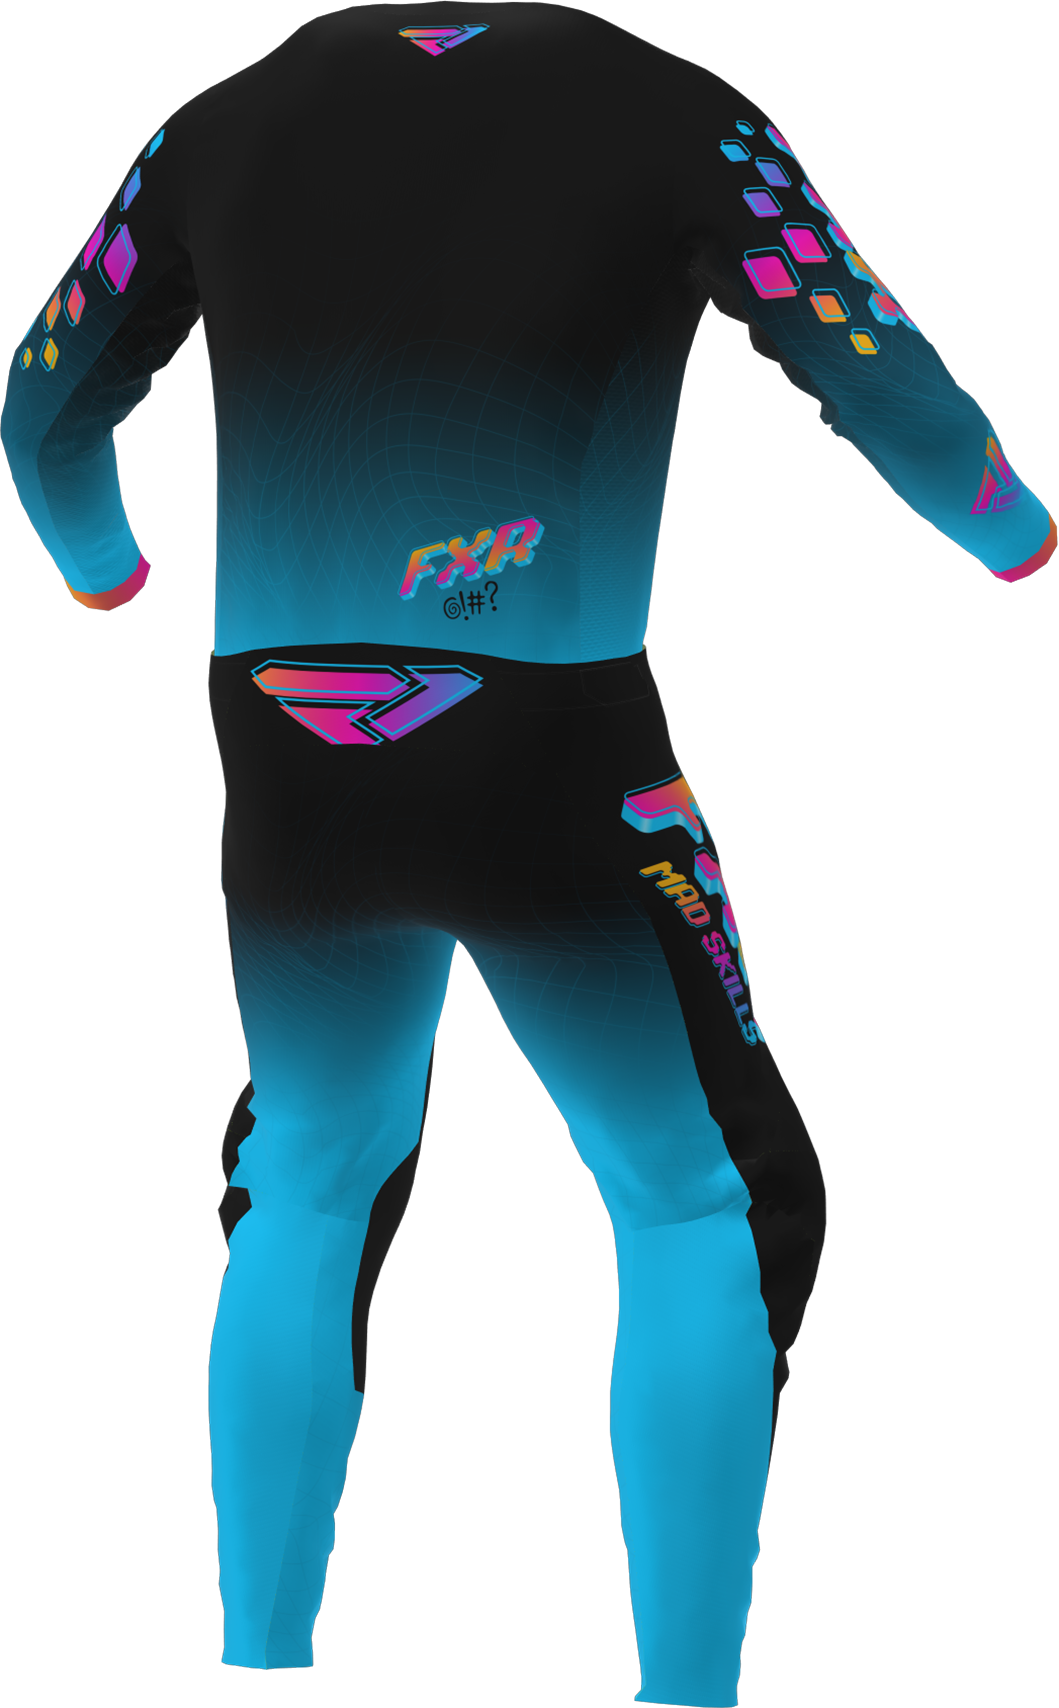 A 3D image of FXR's Podium MX Jersey and Pant in Mad Skills colorway